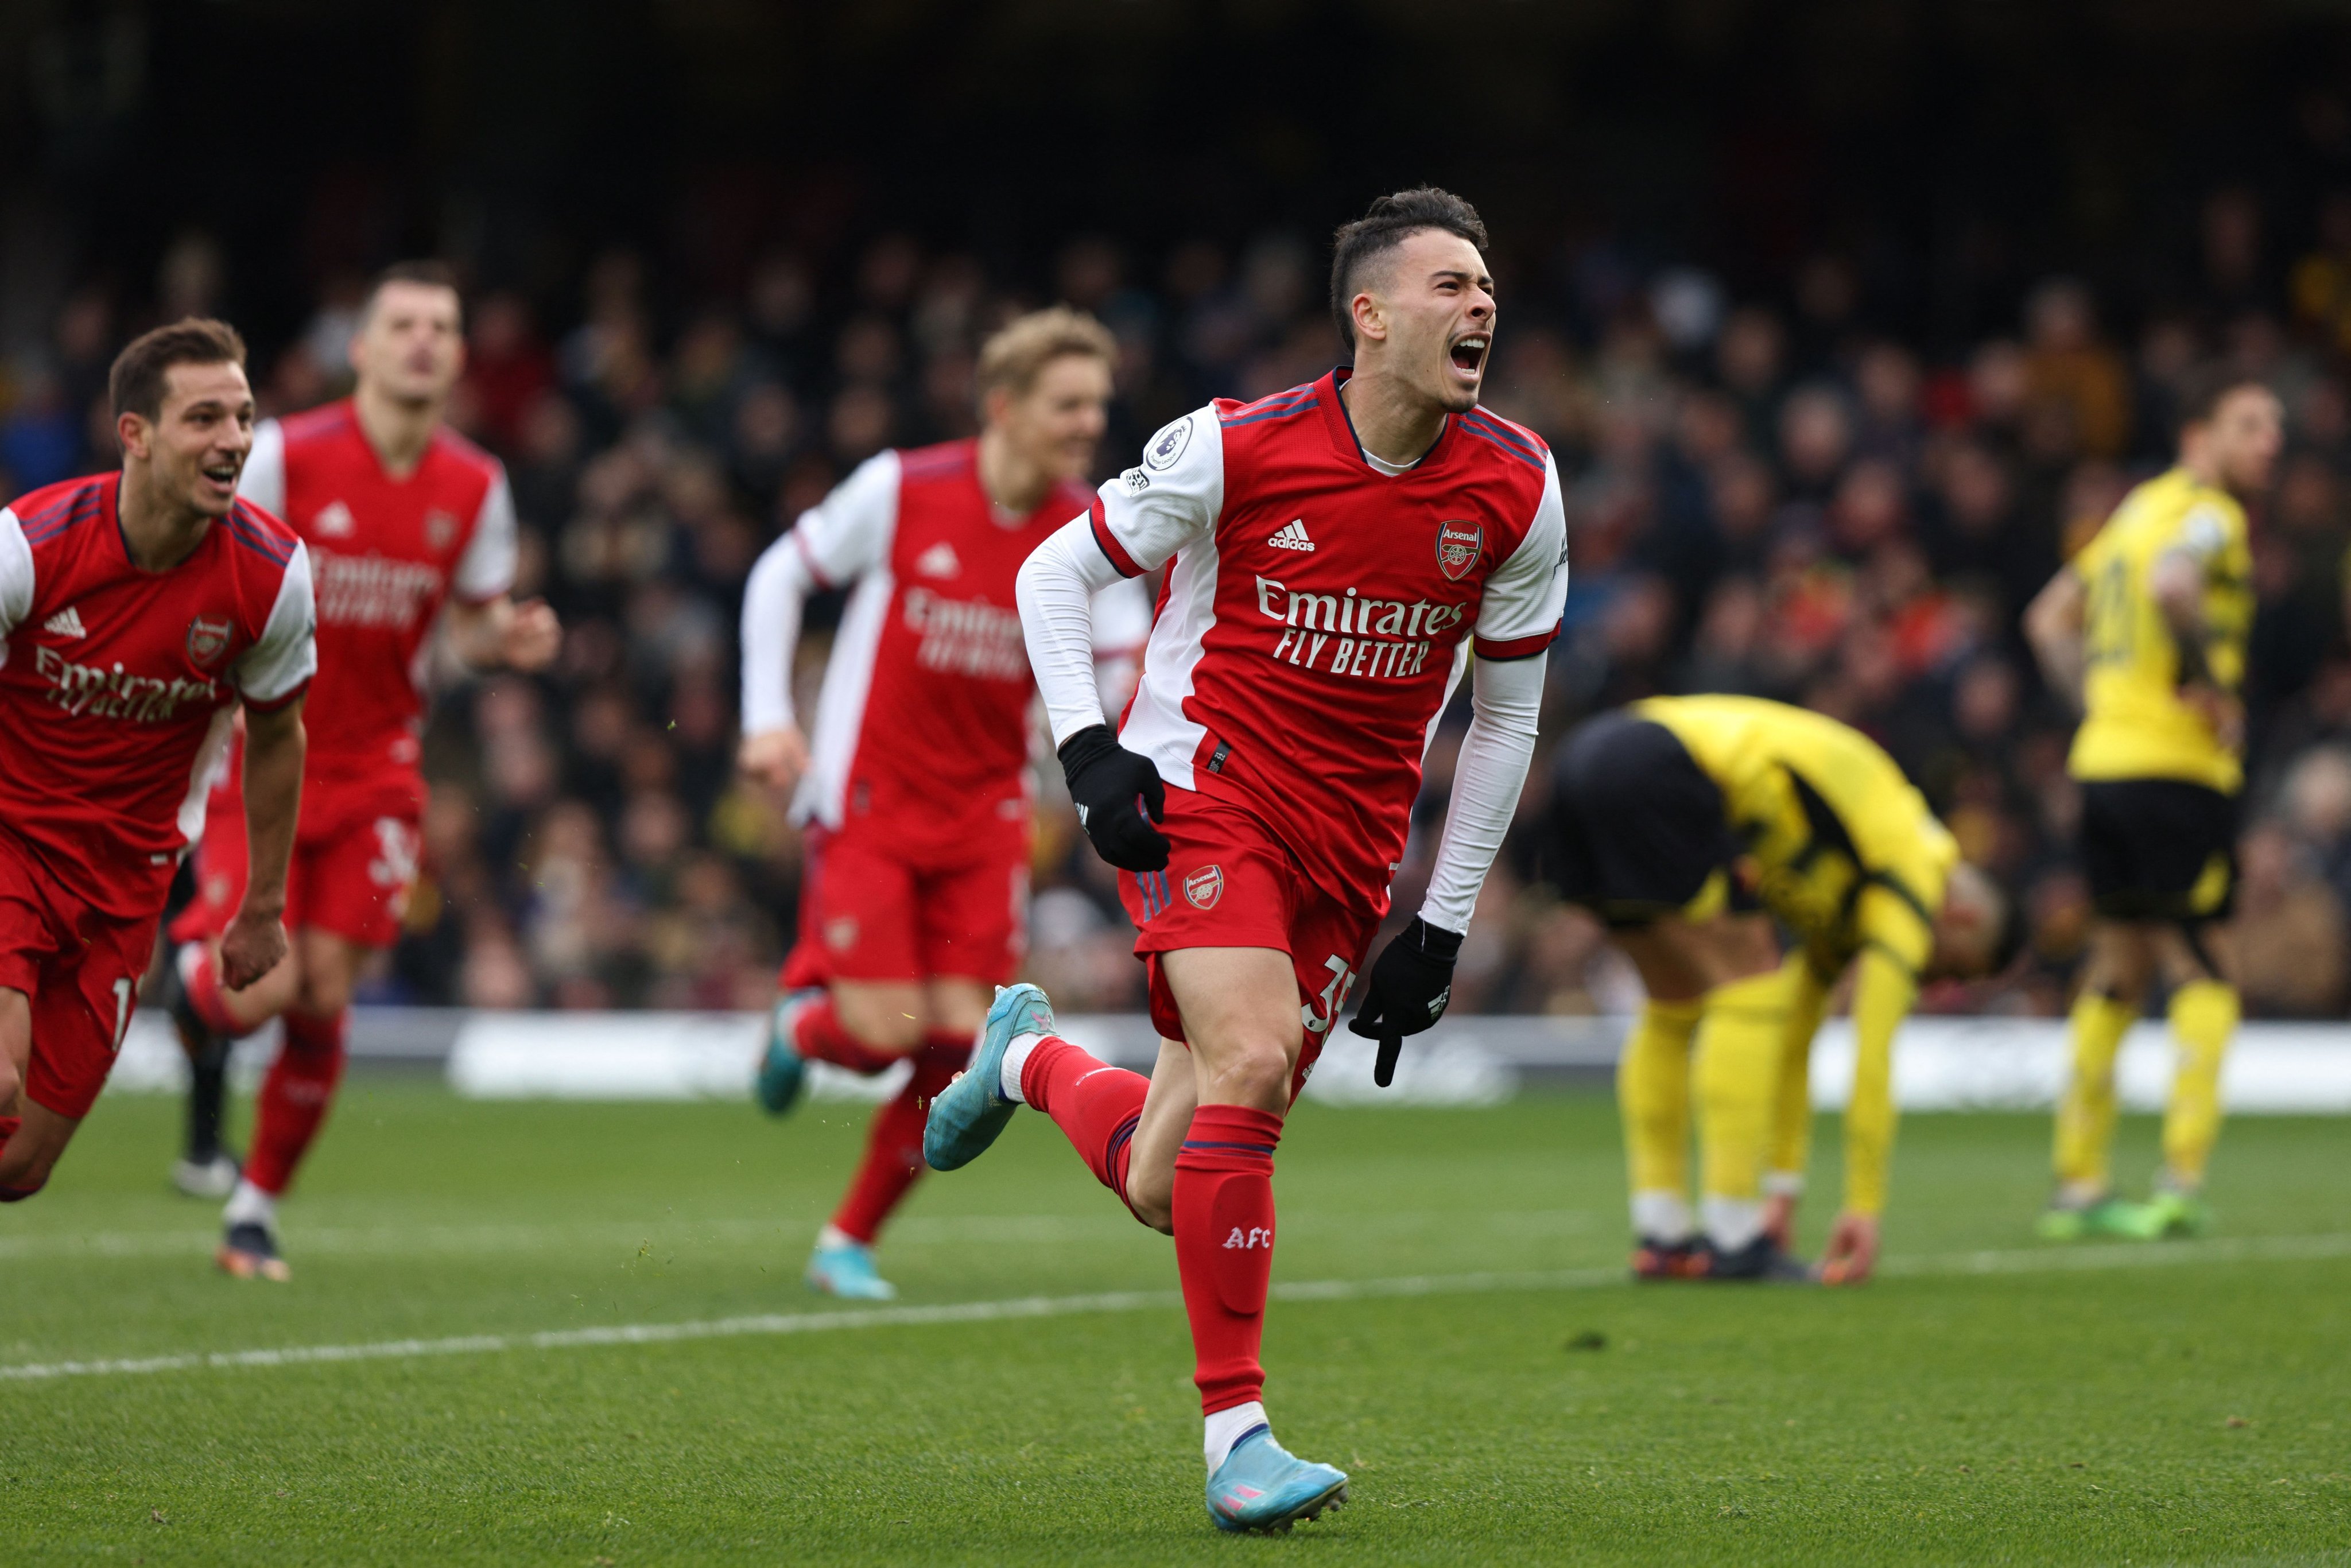 Watford 2-3 Arsenal LIVE: Arsenal move into fourth place as the Gunners beat Watford in a thrilling game despite Cucho Hernandez’s ‘BICYCLE KICK’ goal